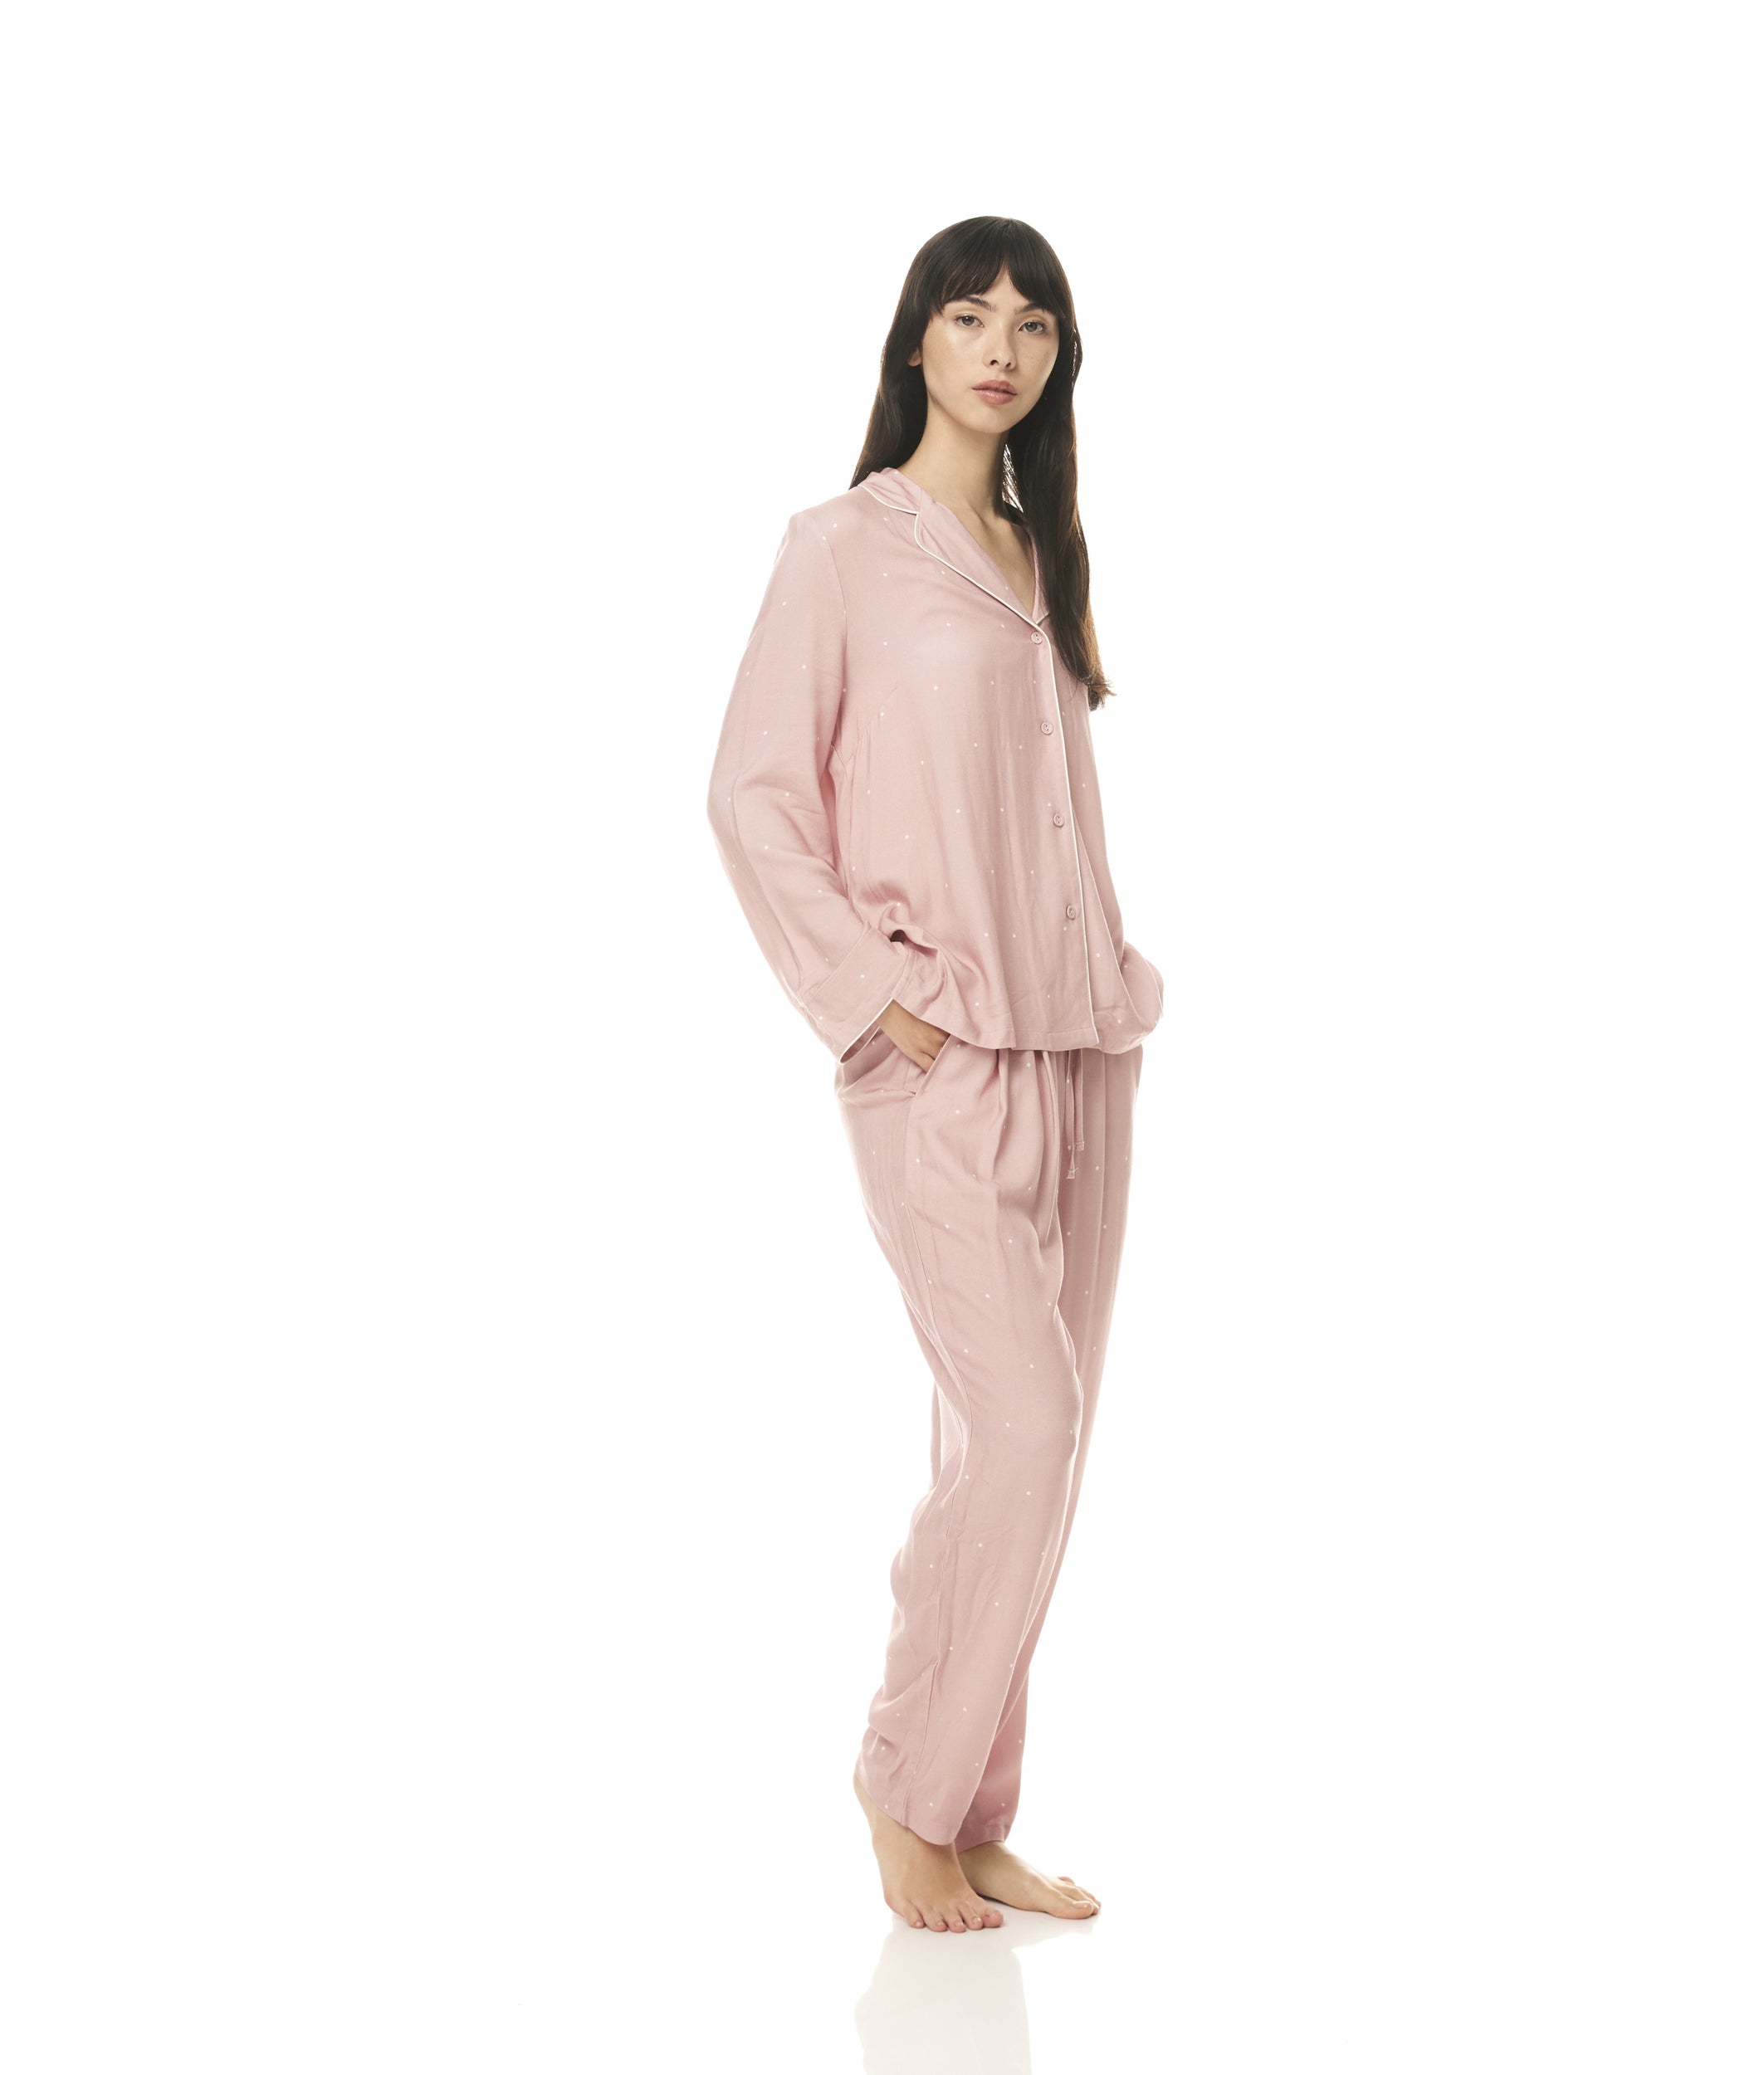 &quot;Sleep in style and sustainability with bamboo pajamas featuring playful pink polka dots. Shop now!&quot;